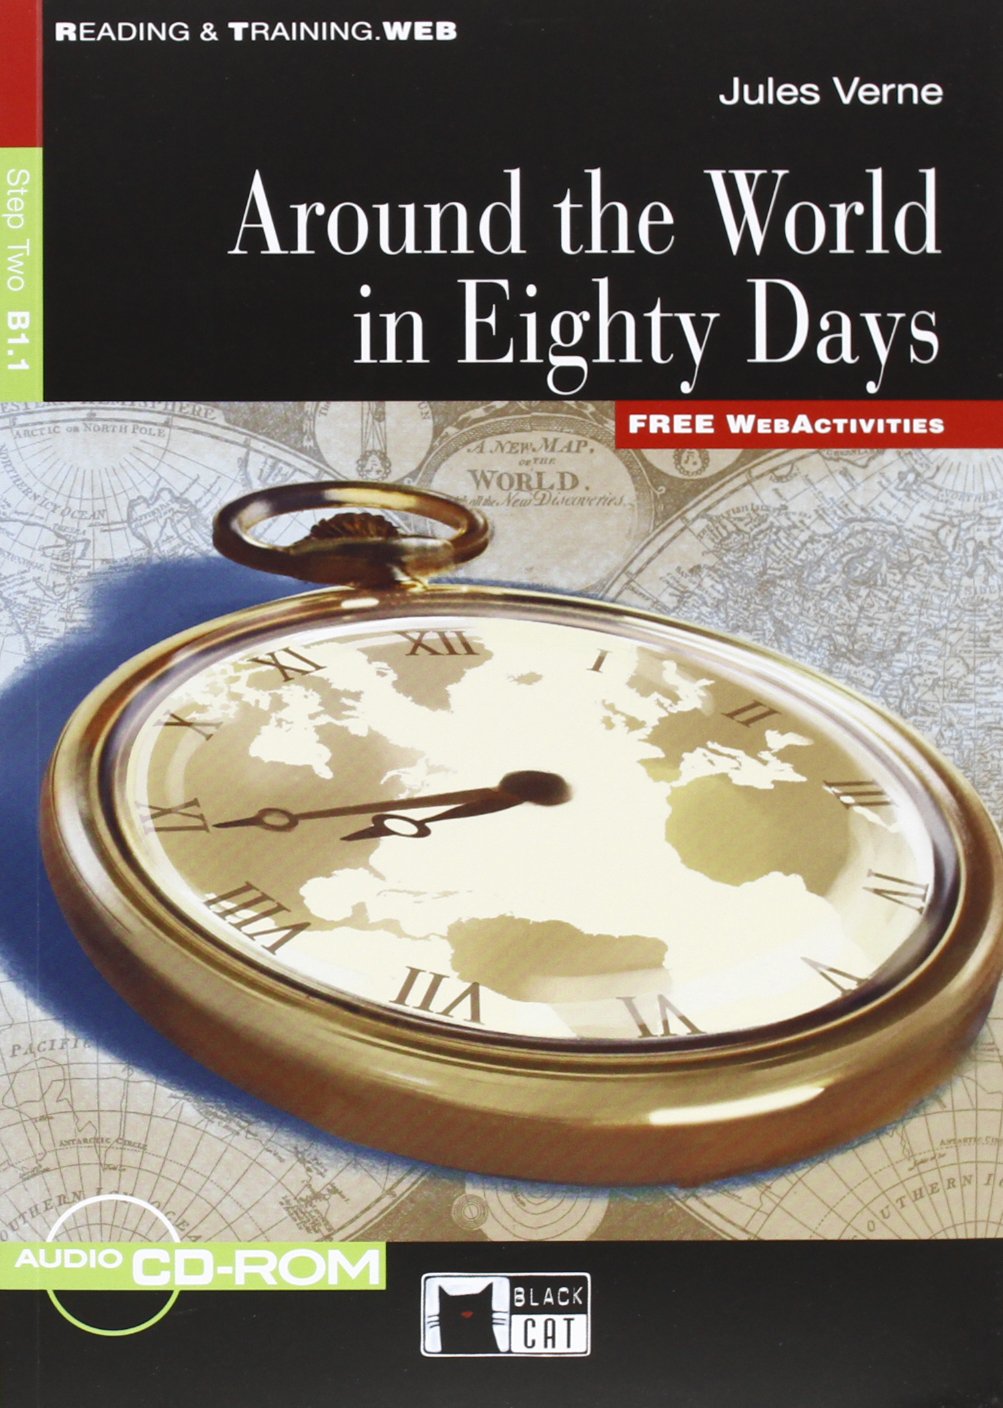 AROUND THE WORLD IN EIGHTY DAYS (READING & TRAINING STEP2, B1.1)Book+AudioCD+CD-ROM